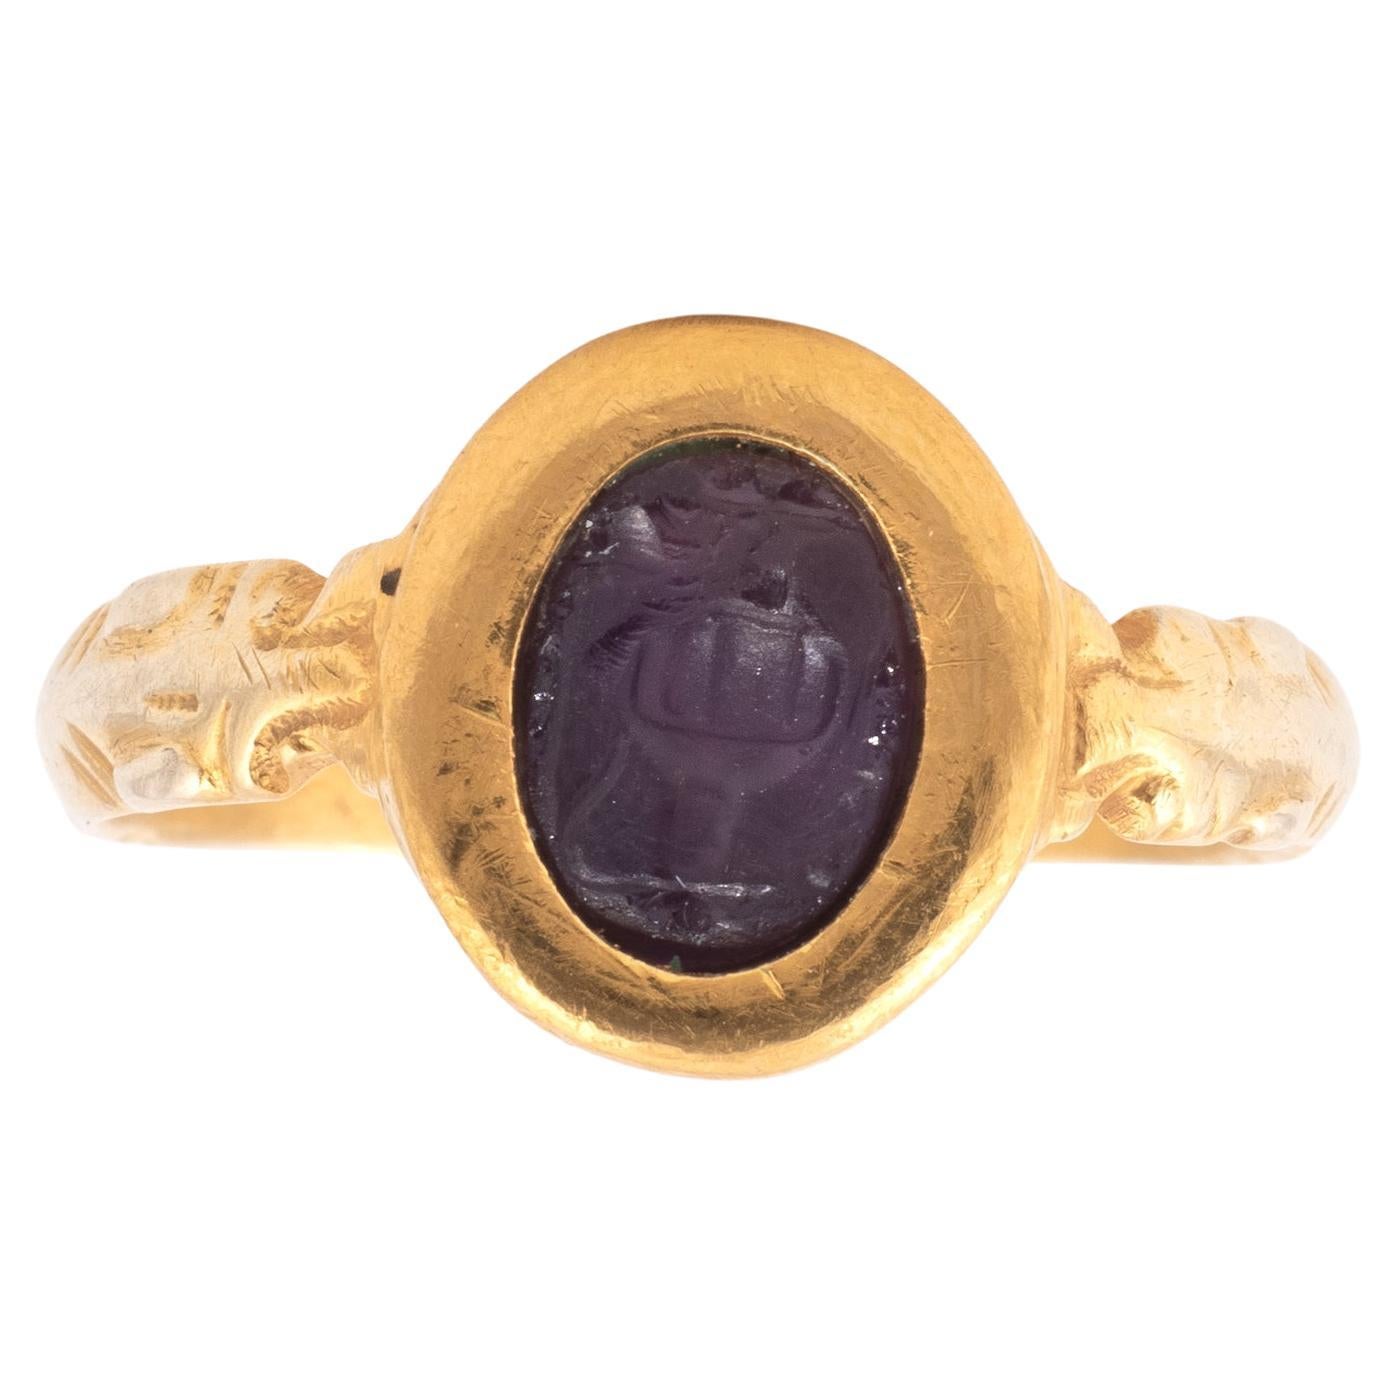 Reading and Displaying Monograms on Byzantine Signet Rings